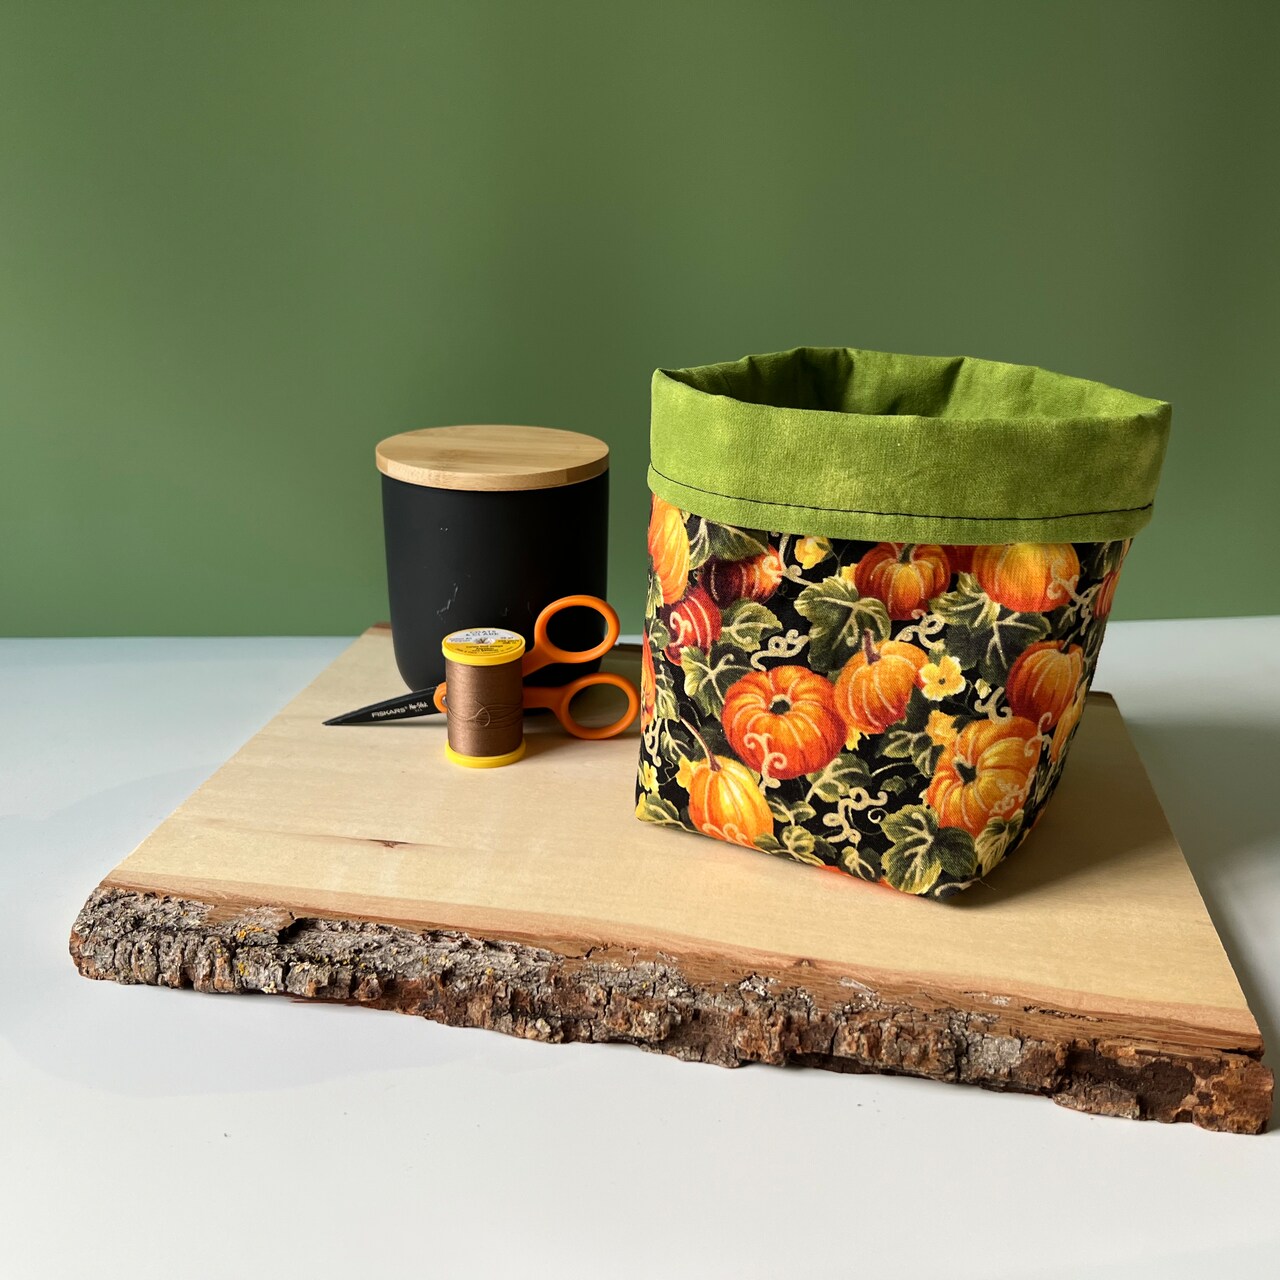 From Square to Storage: Learn How to Sew a Fabric Basket with Kesley Anderson